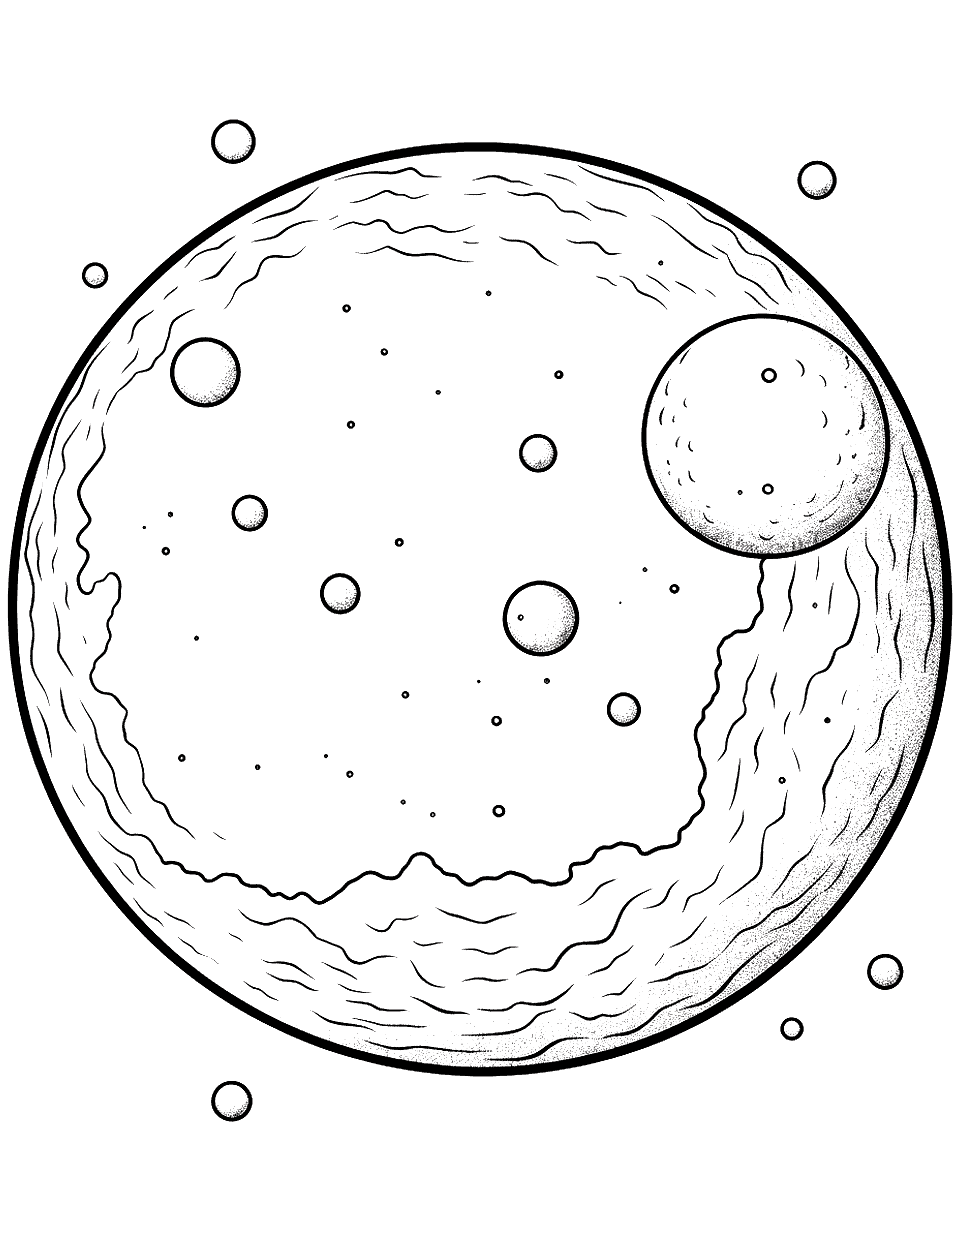 Realistic Moon Craters Solar System Coloring Page - The moon’s surface with craters.